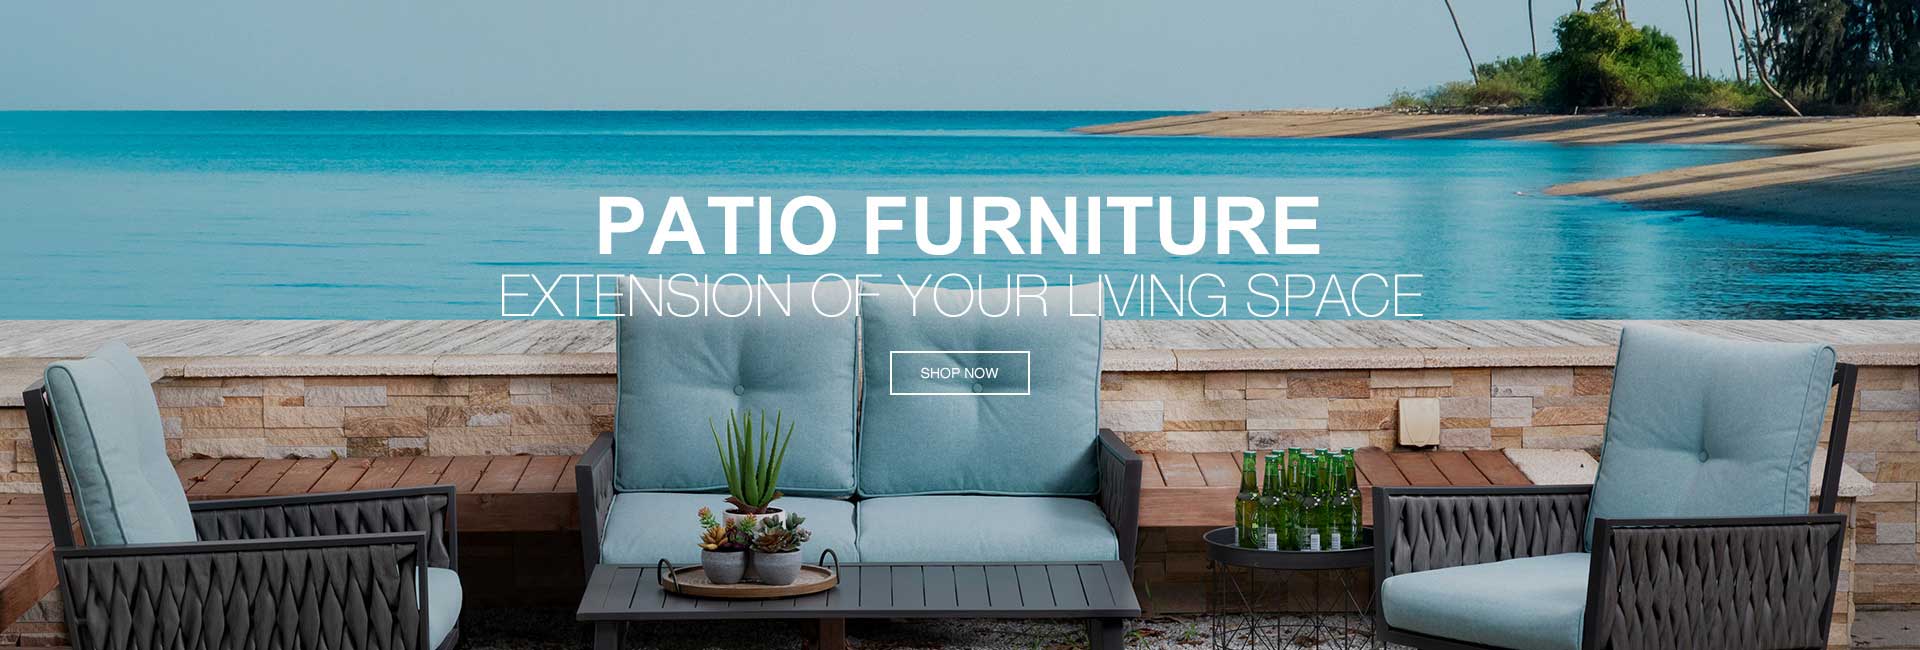 Patio Furniture | Patio Loveseats, Dining sets, Bench